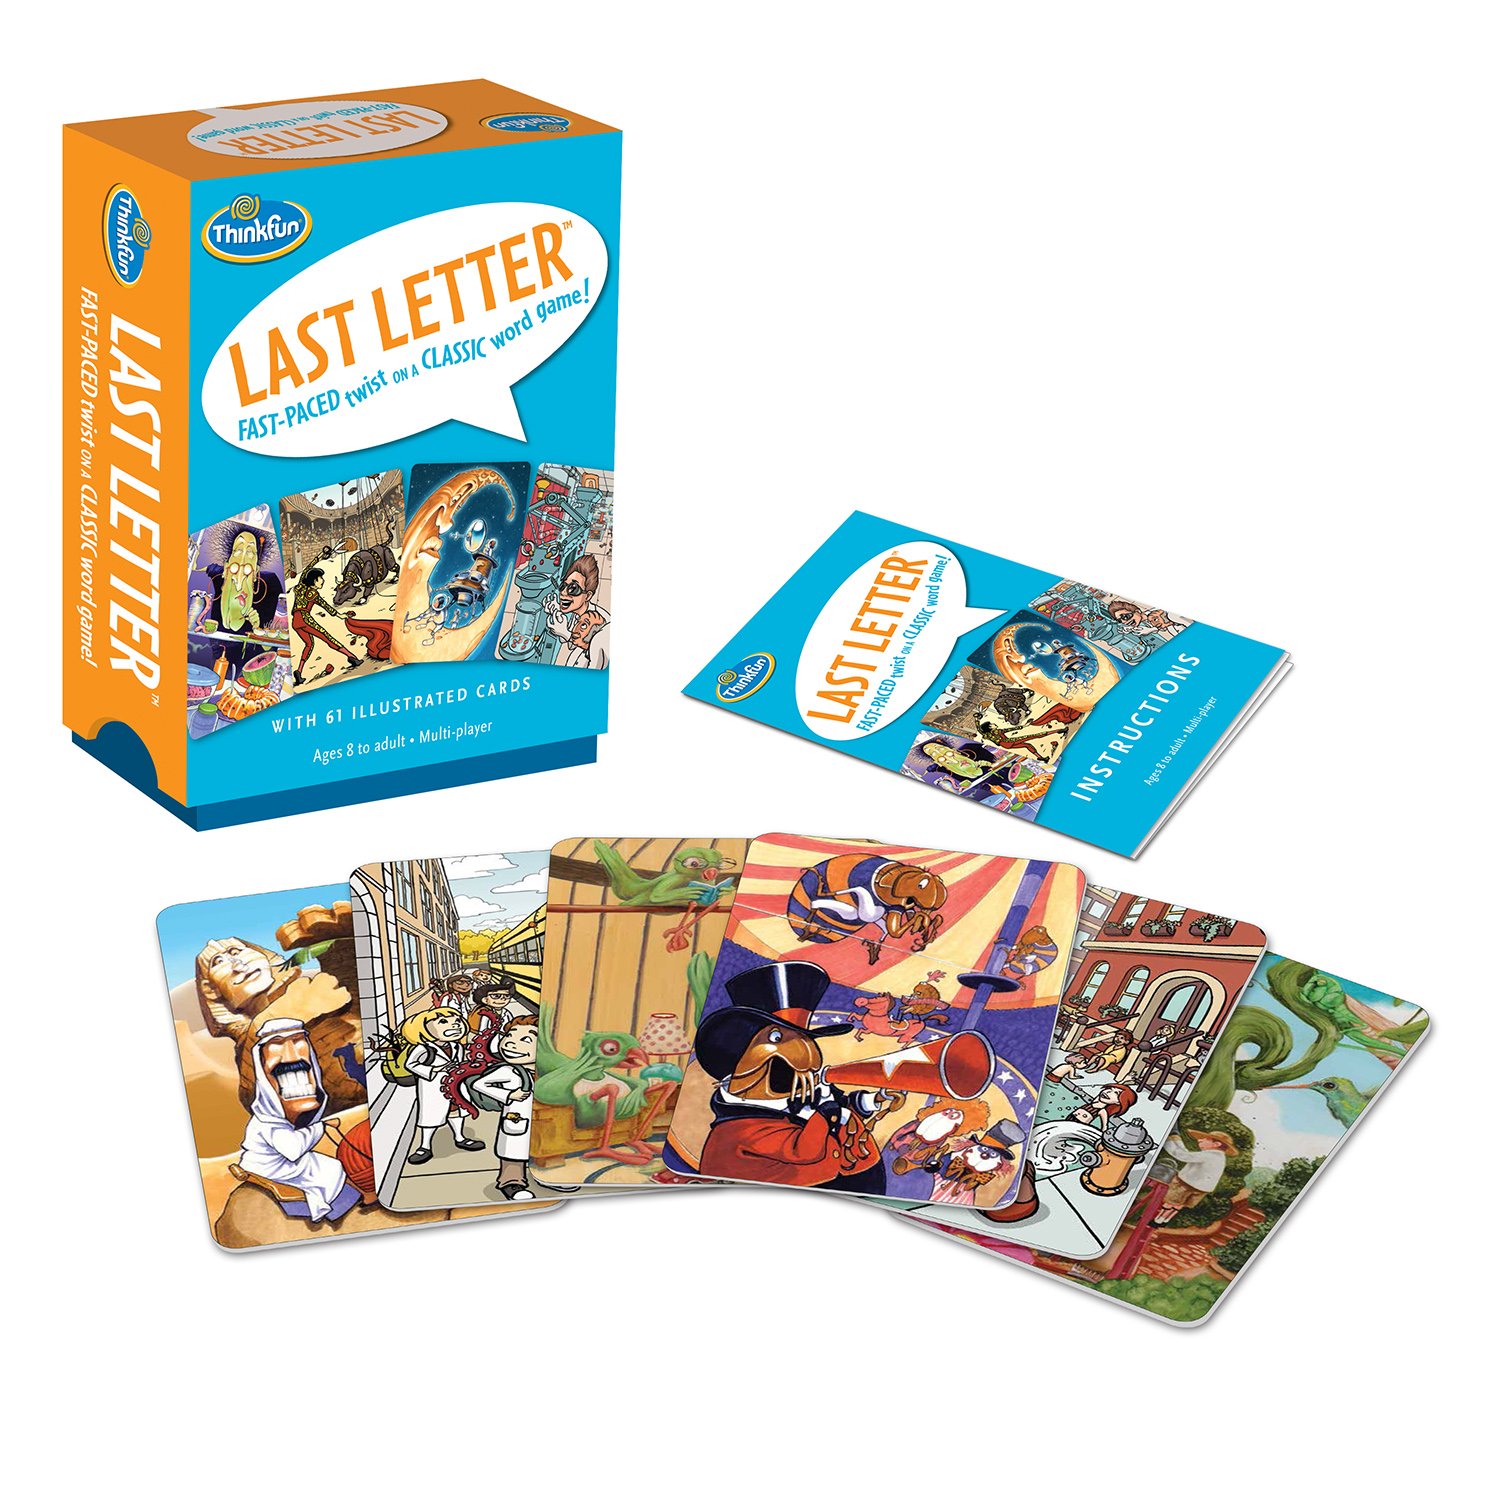 Think Fun Last Letter Card Game